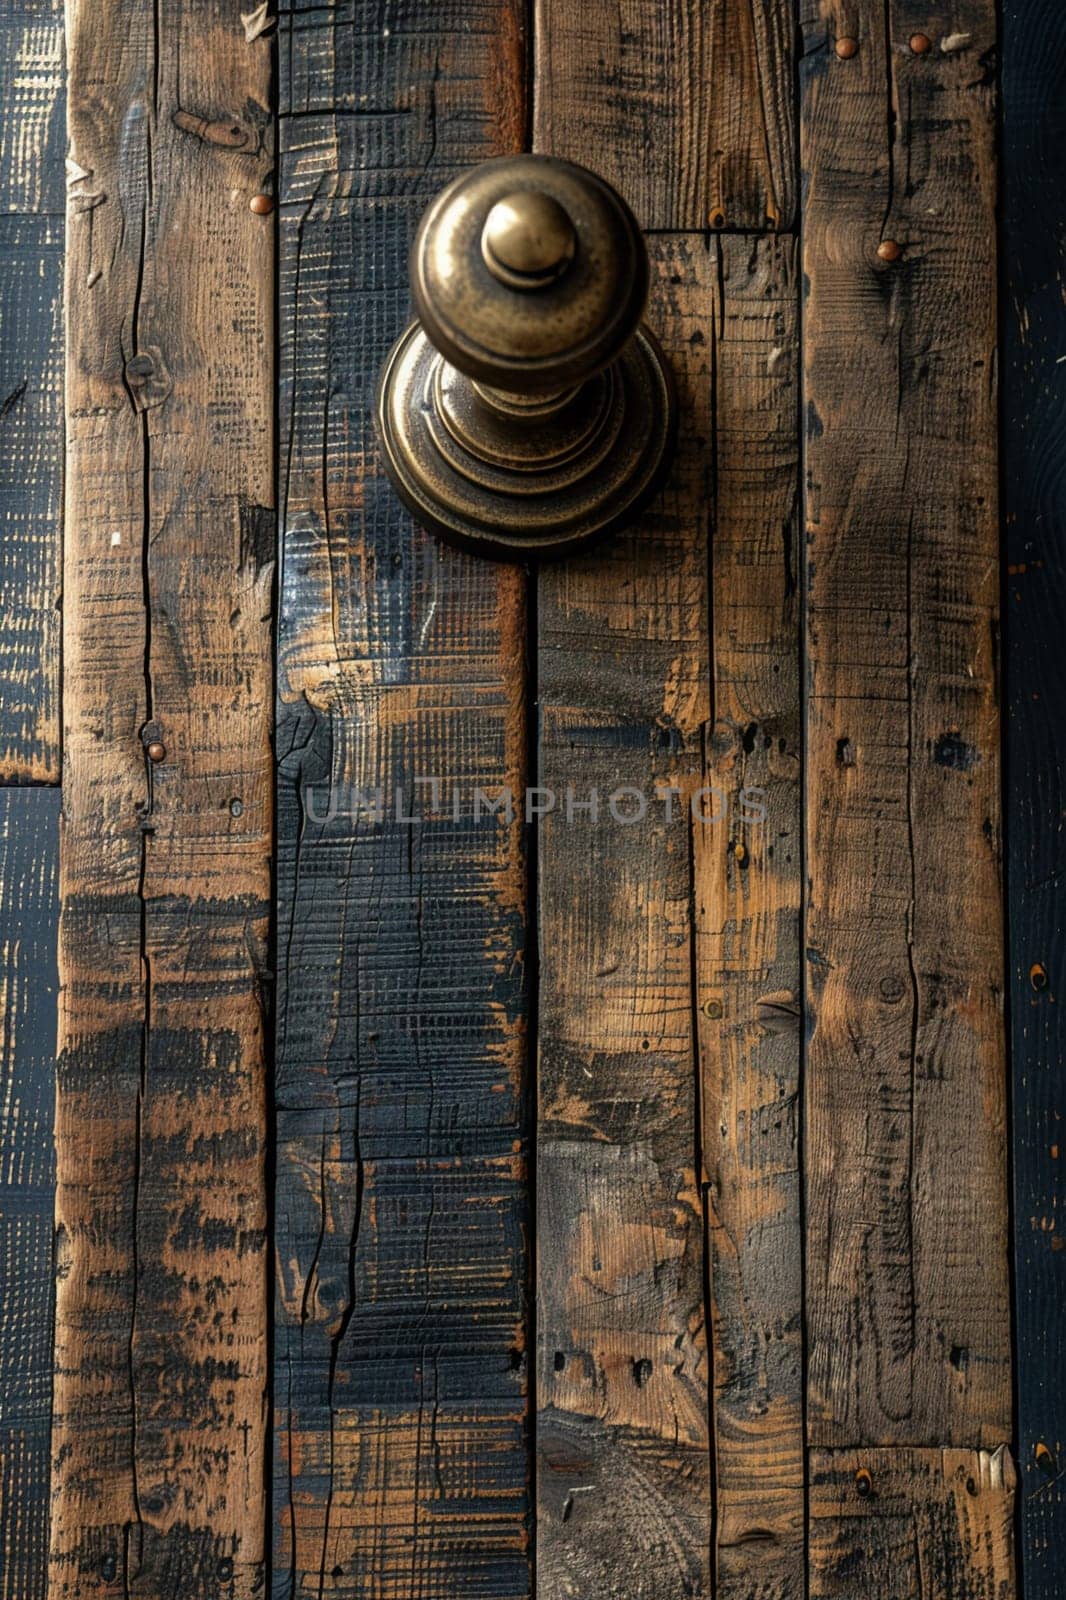 Vintage Brass Pedestal on an Antique Wood Table The warm metal tones blend with the rich history of the wooden backdrop by Benzoix